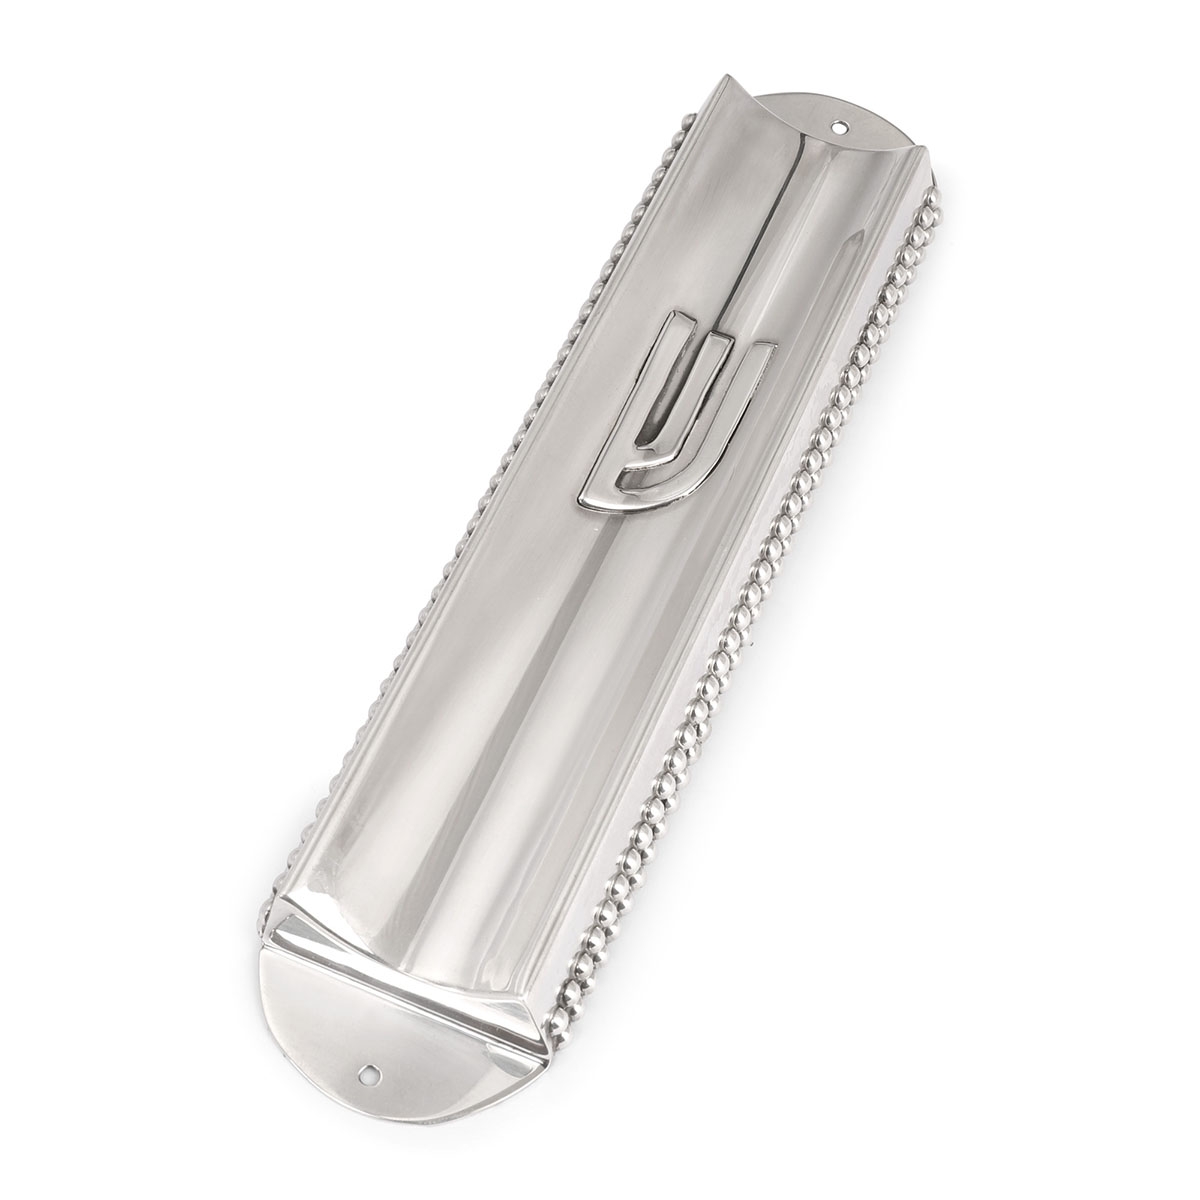 Bier Judaica Handcrafted Sterling Silver Ridged Mezuzah Case With Beaded Design - 1